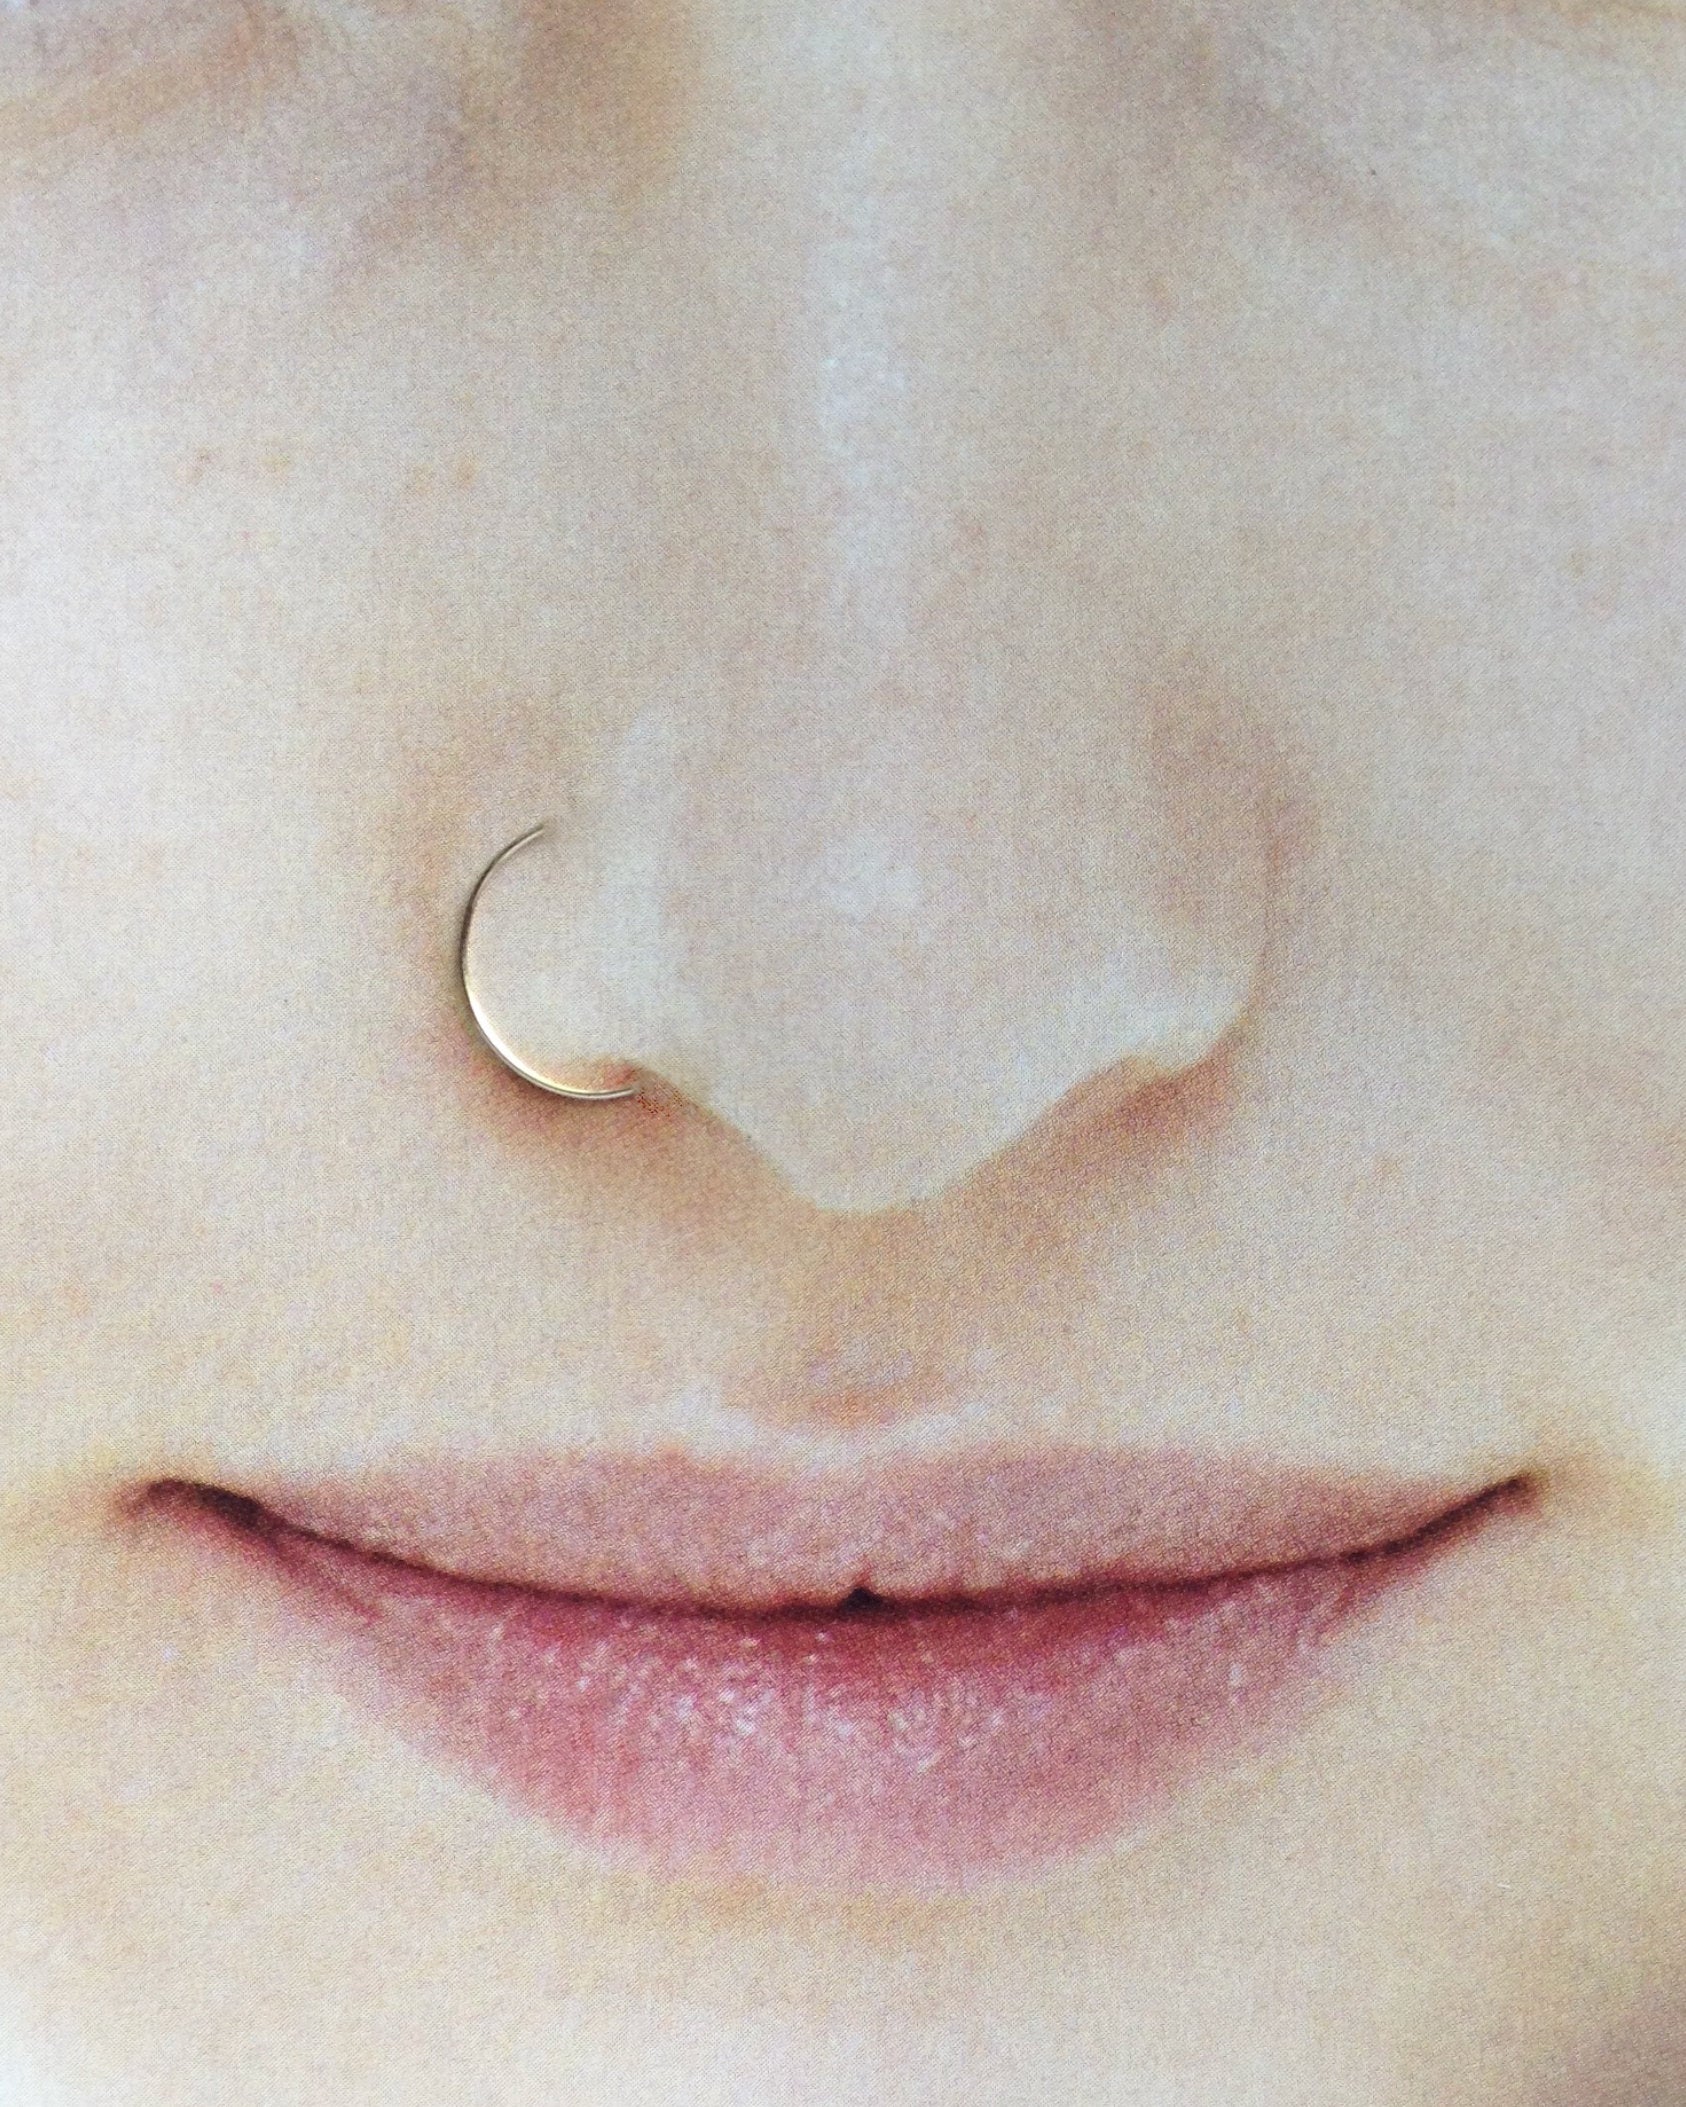 Tiny Nose Stud Gold or Silver L Shaped - Moonli Designs